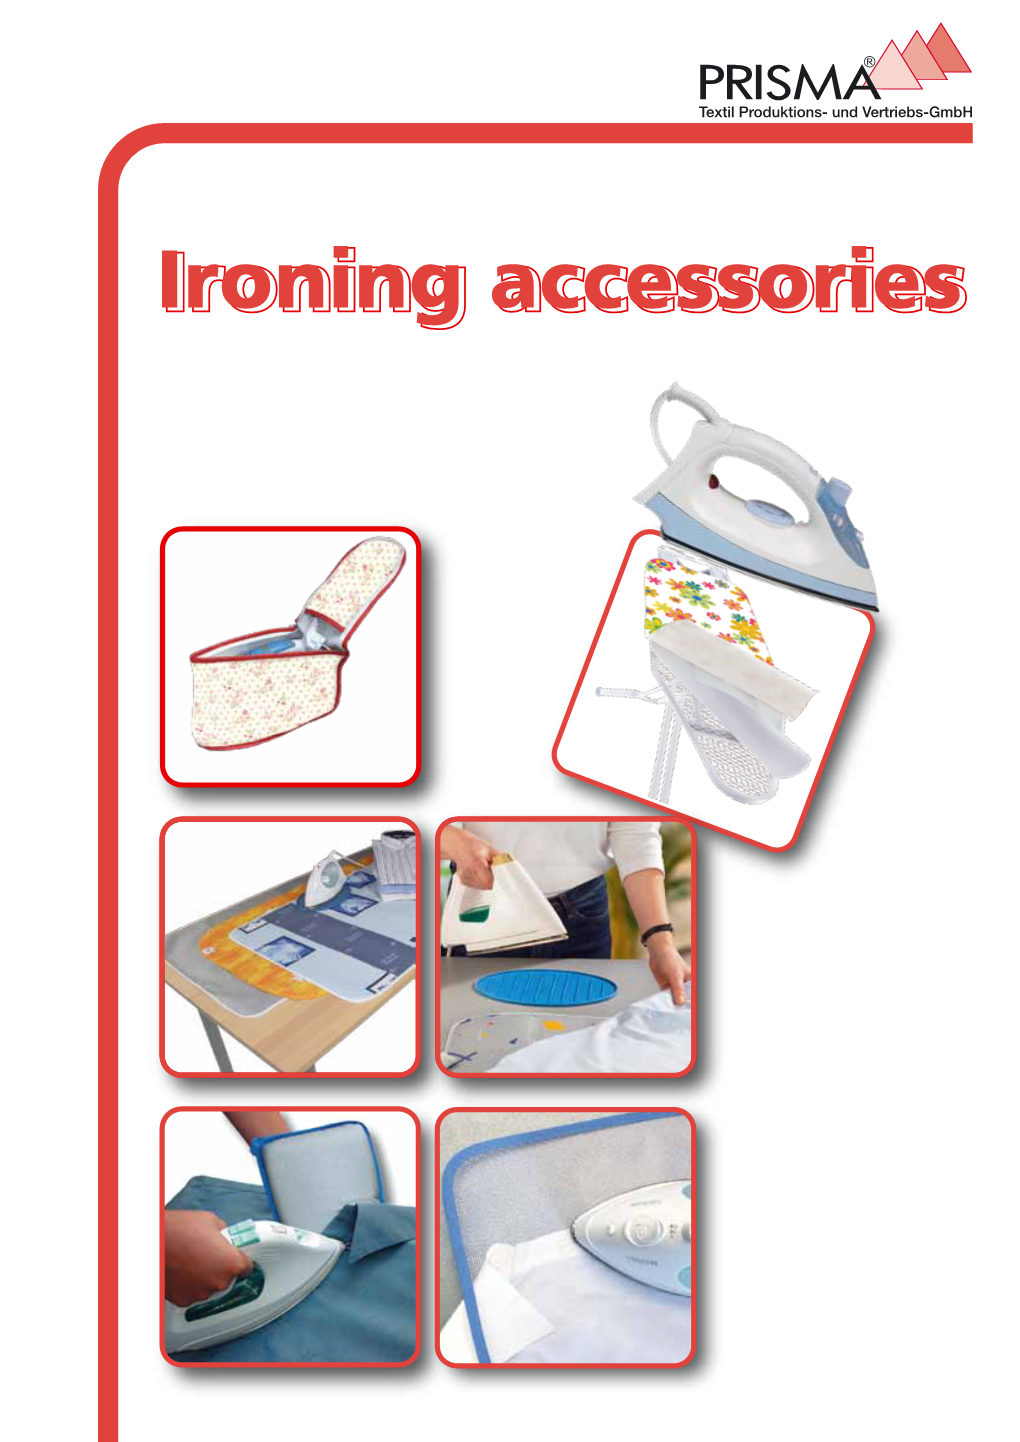 Ironing Accessoriesaccessories You Stand to Benefit Our Many Years of Experience, from Our Flexibility and Our High Quality Standards